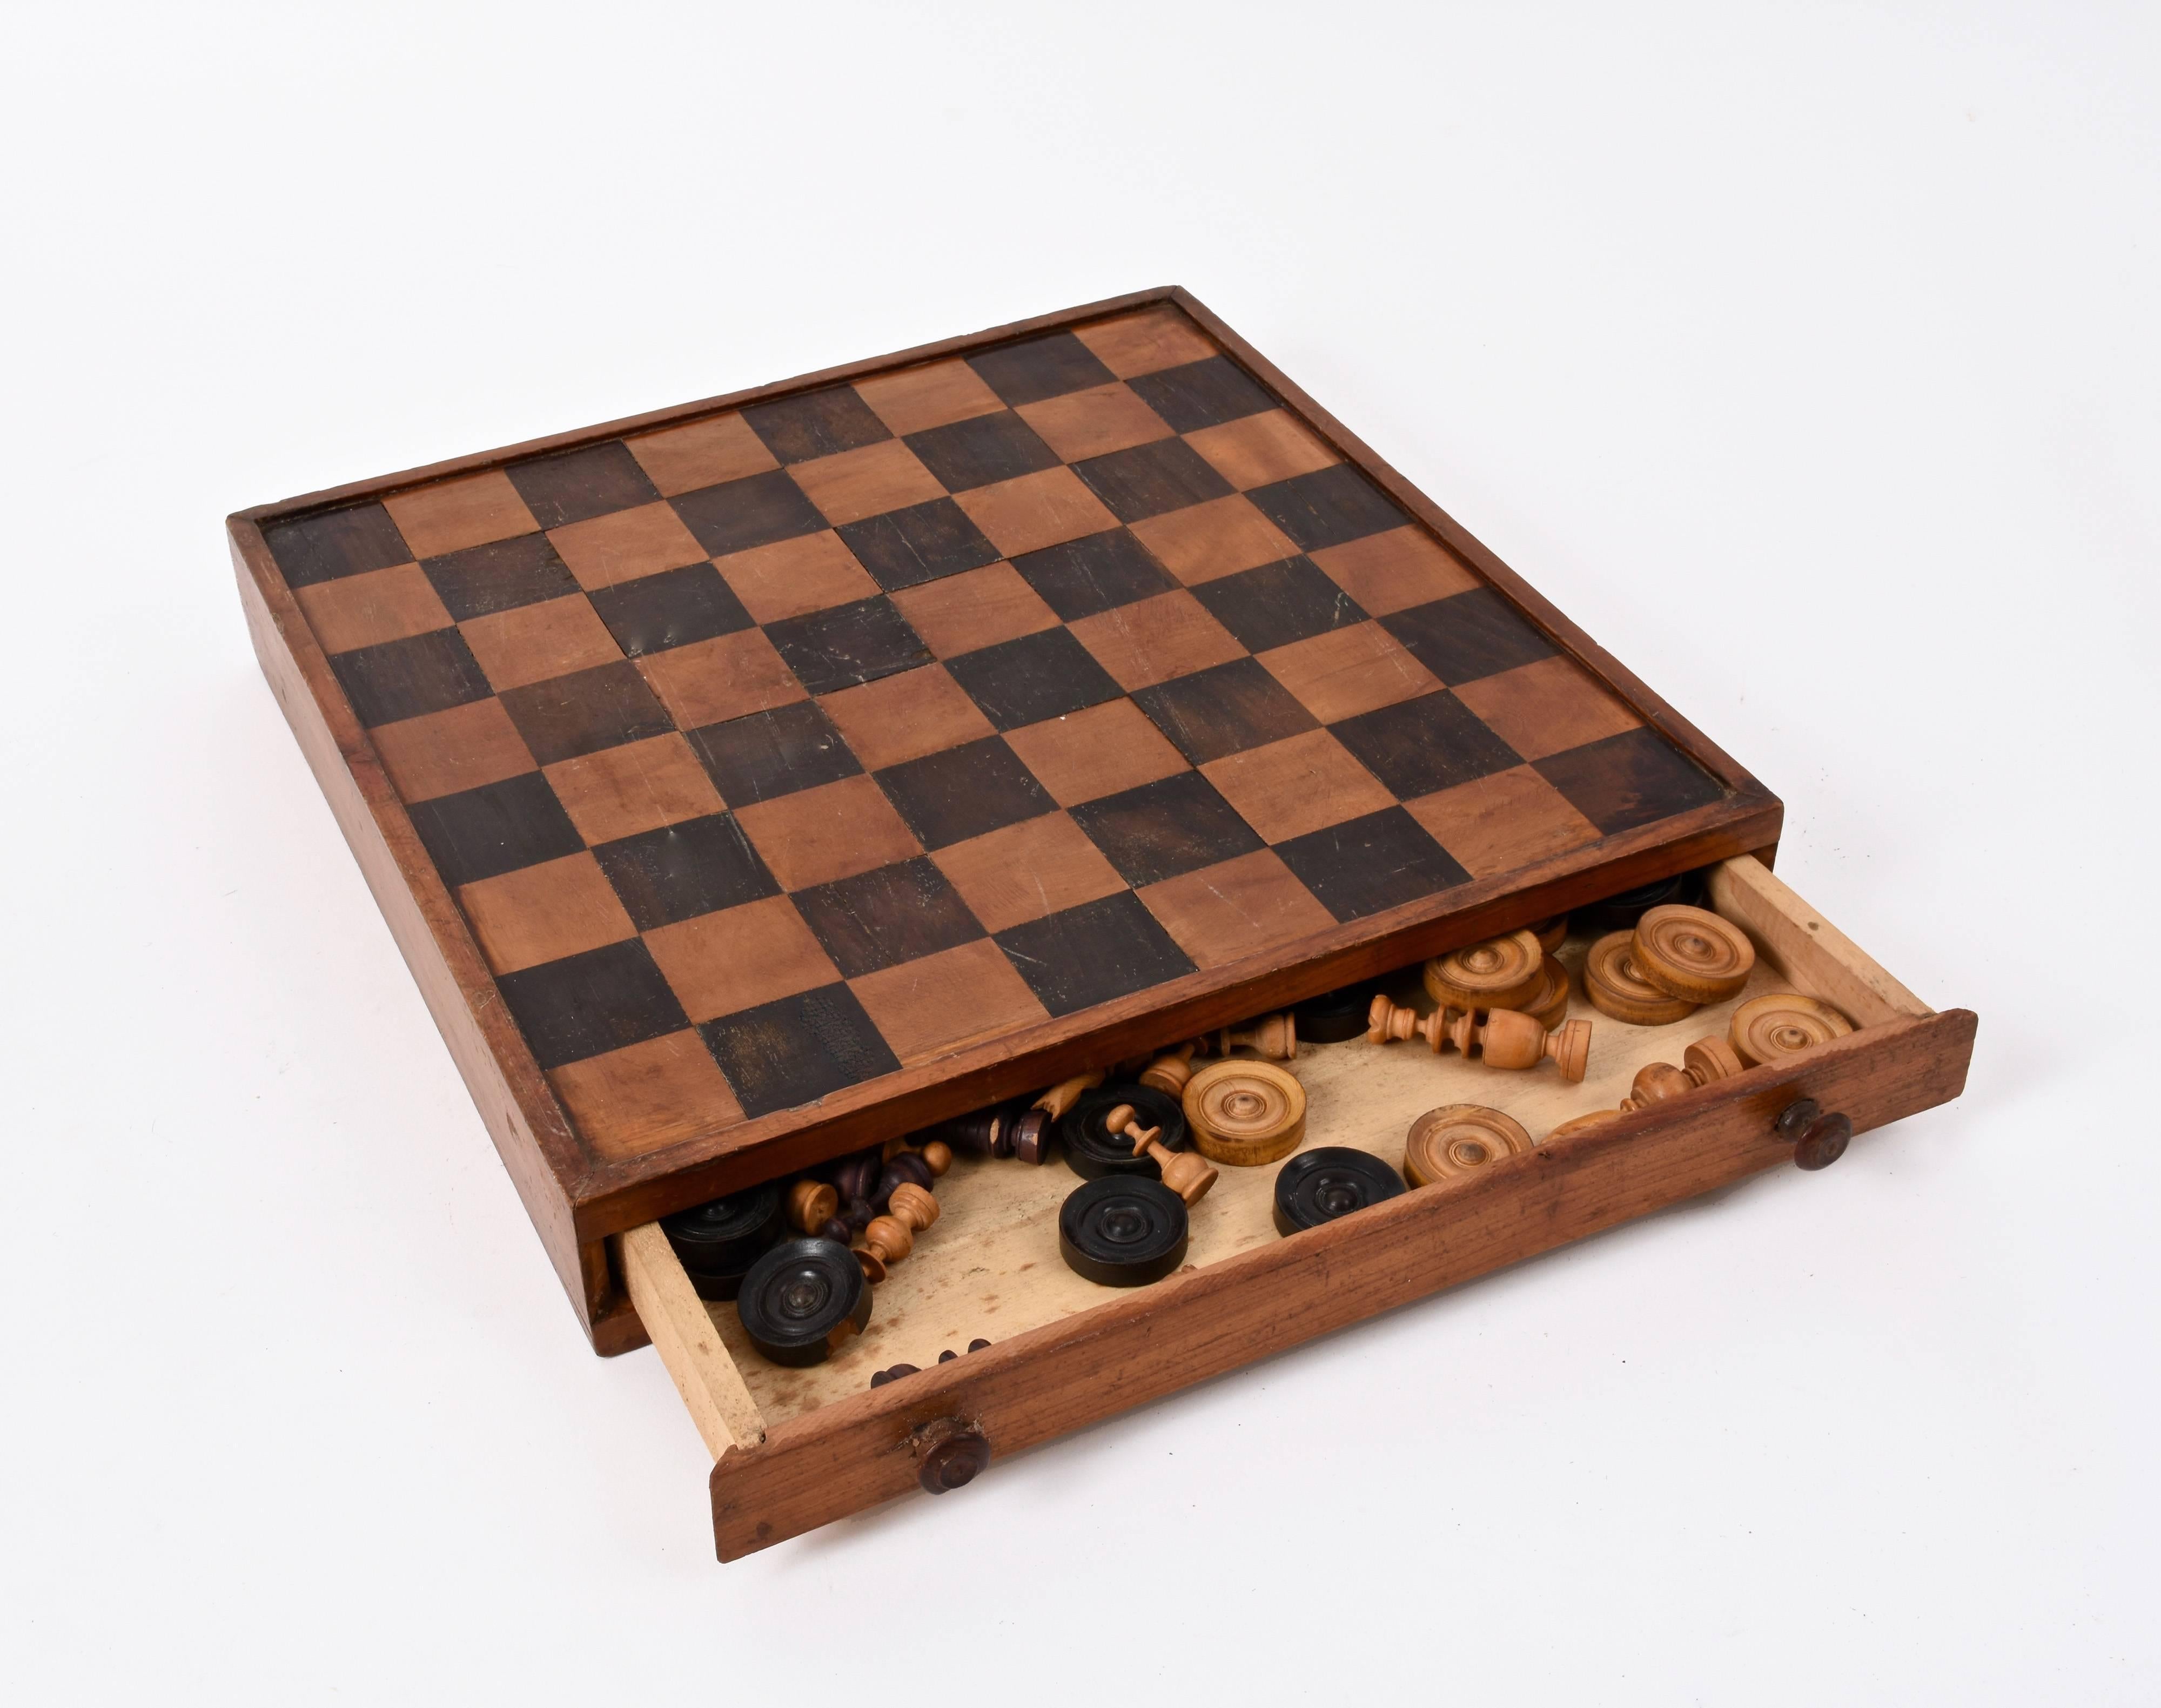 A 19th century handmade games box. Chess or checkers game boards. The game box comes with the 32 and 24 chess pieces included. It is one of the most interesting boxes we have seen.